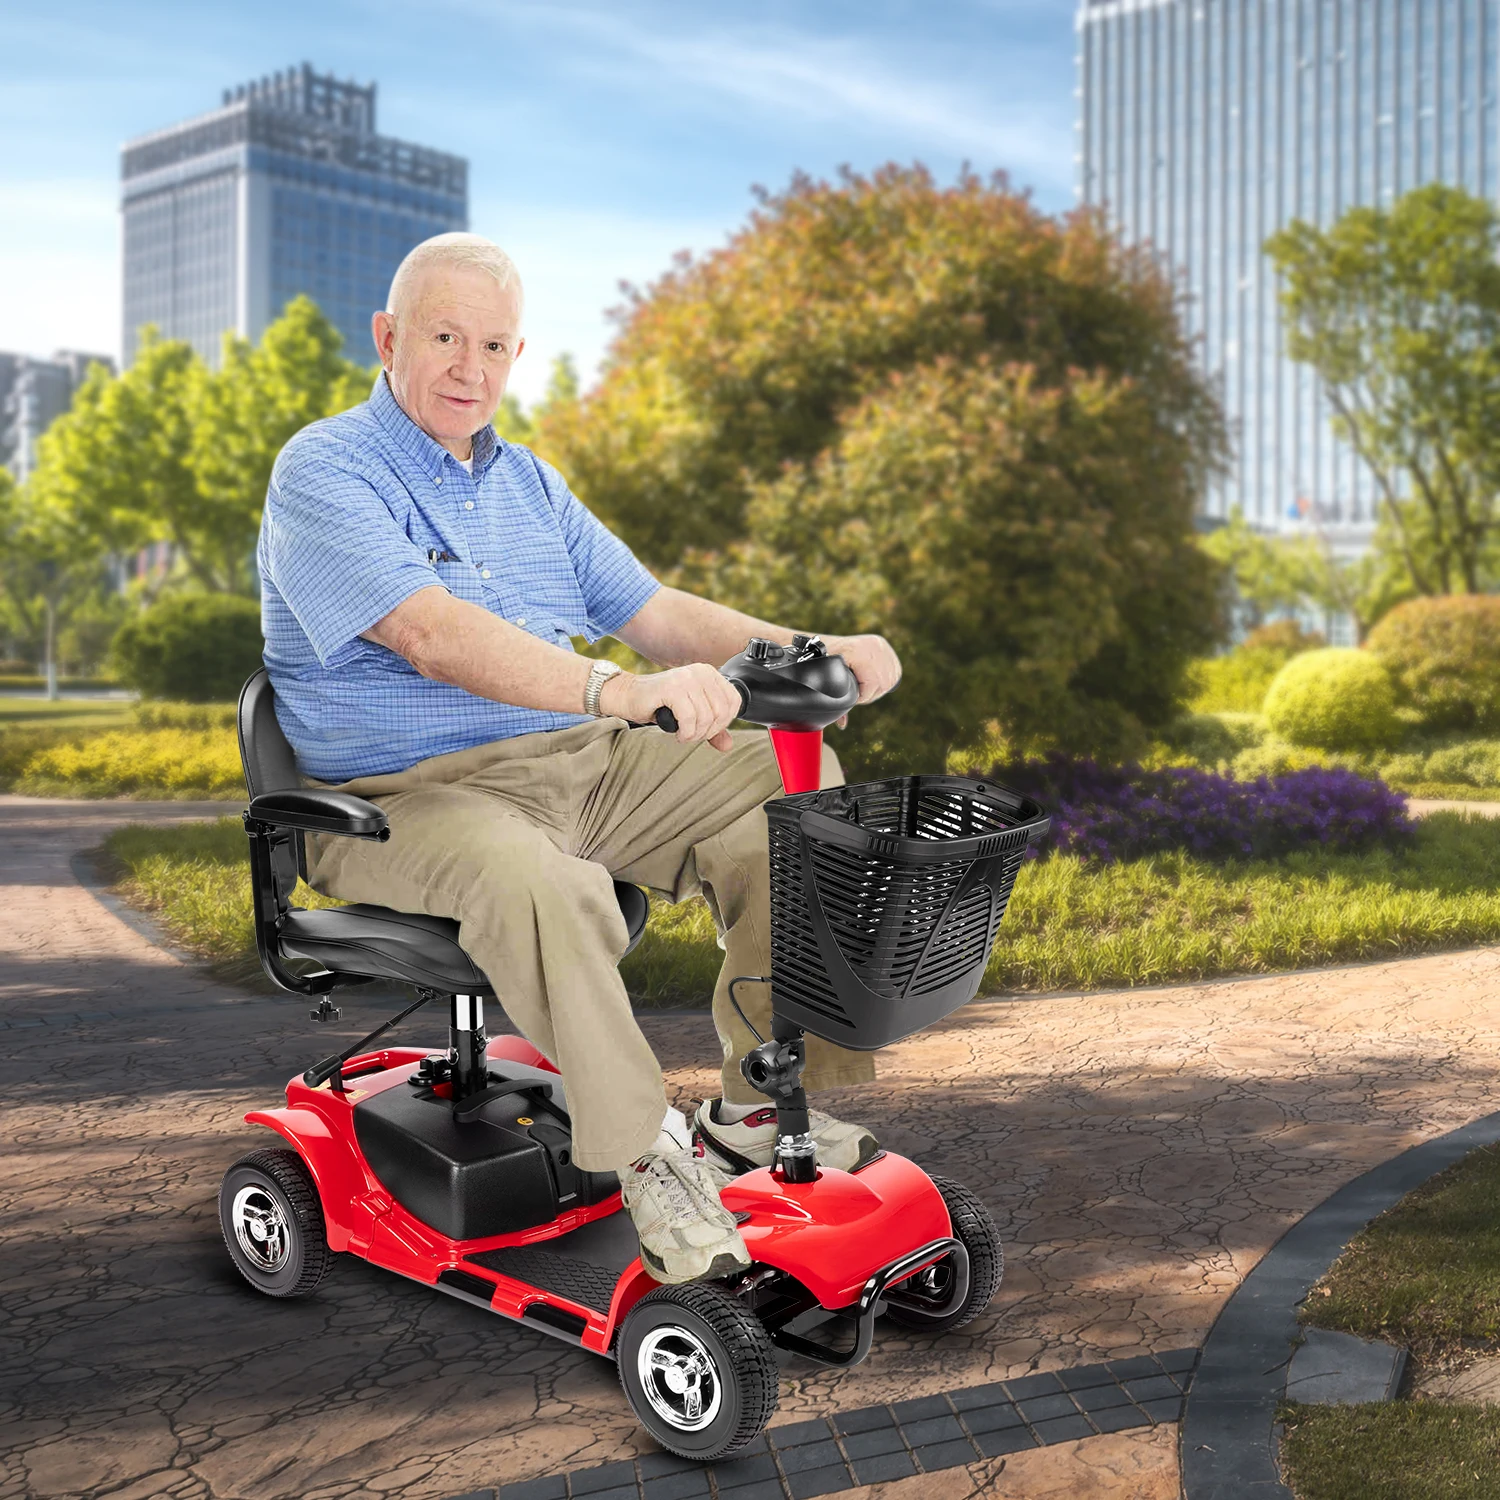 An elderly man riding an electric scooter in a park.